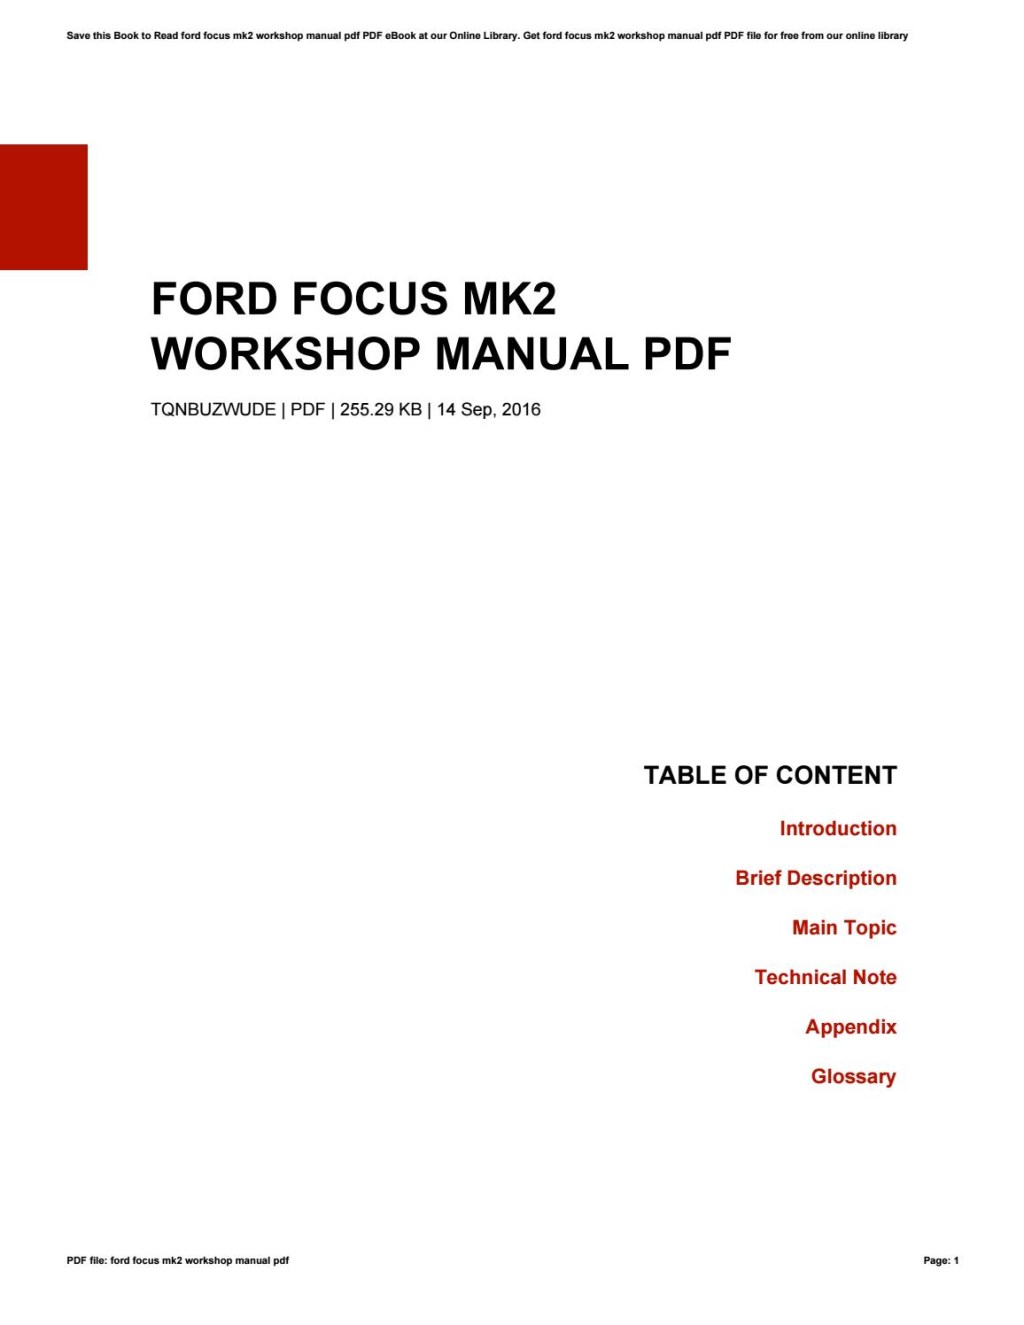 Picture of: Ford focus mk workshop manual pdf by JeanWise56 – Issuu